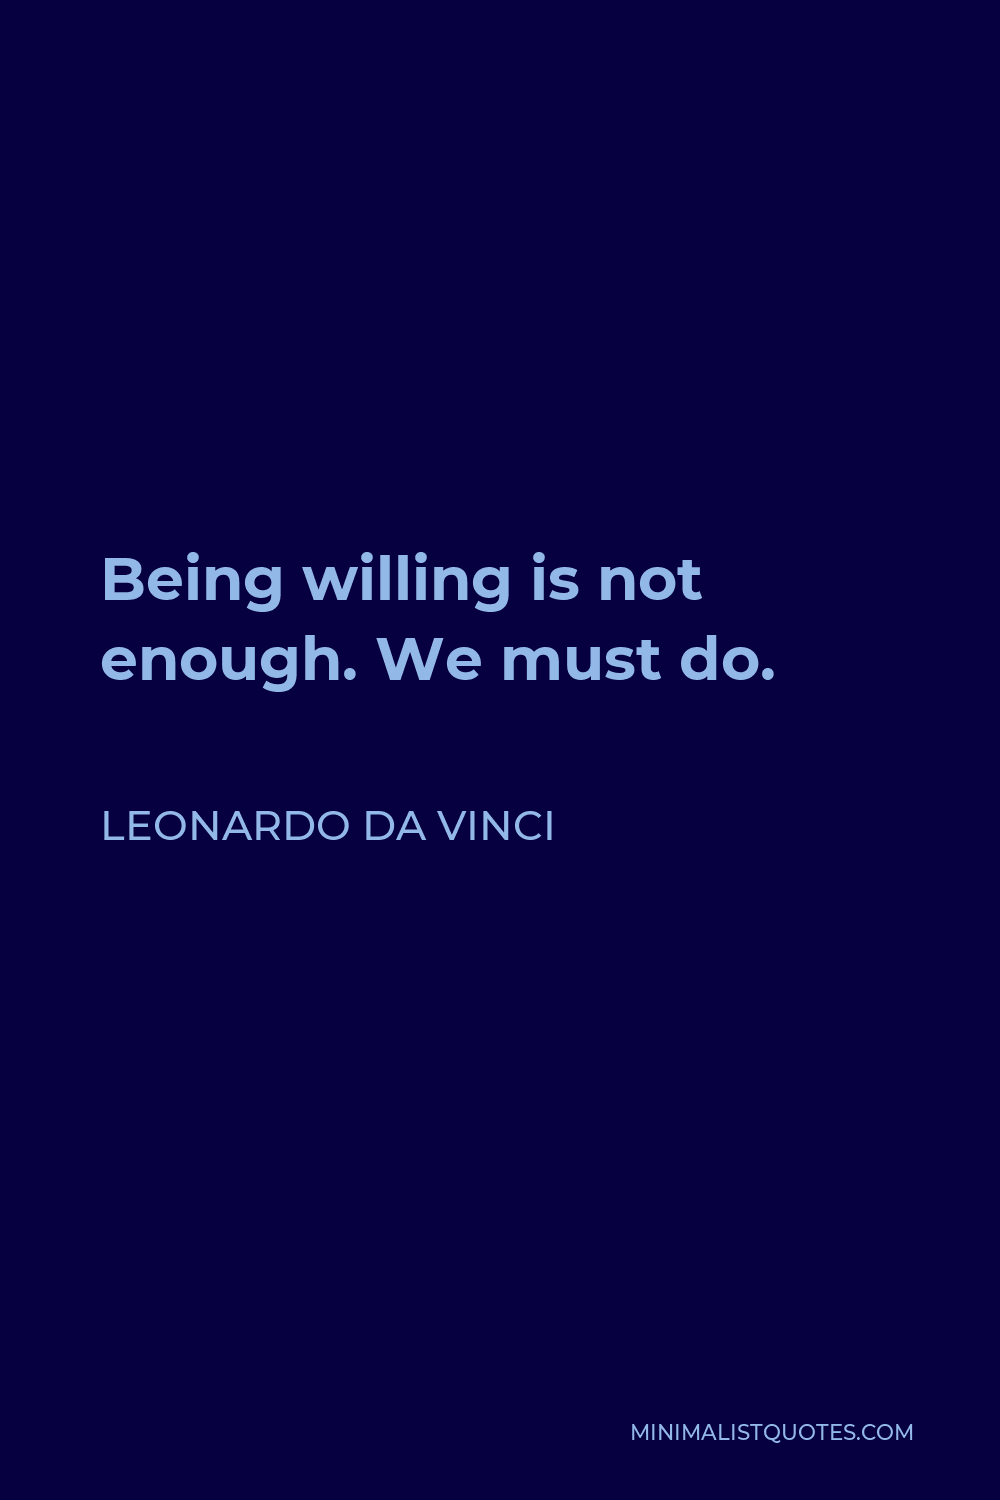 Leonardo da Vinci Quote - Being willing is not enough. We must do.